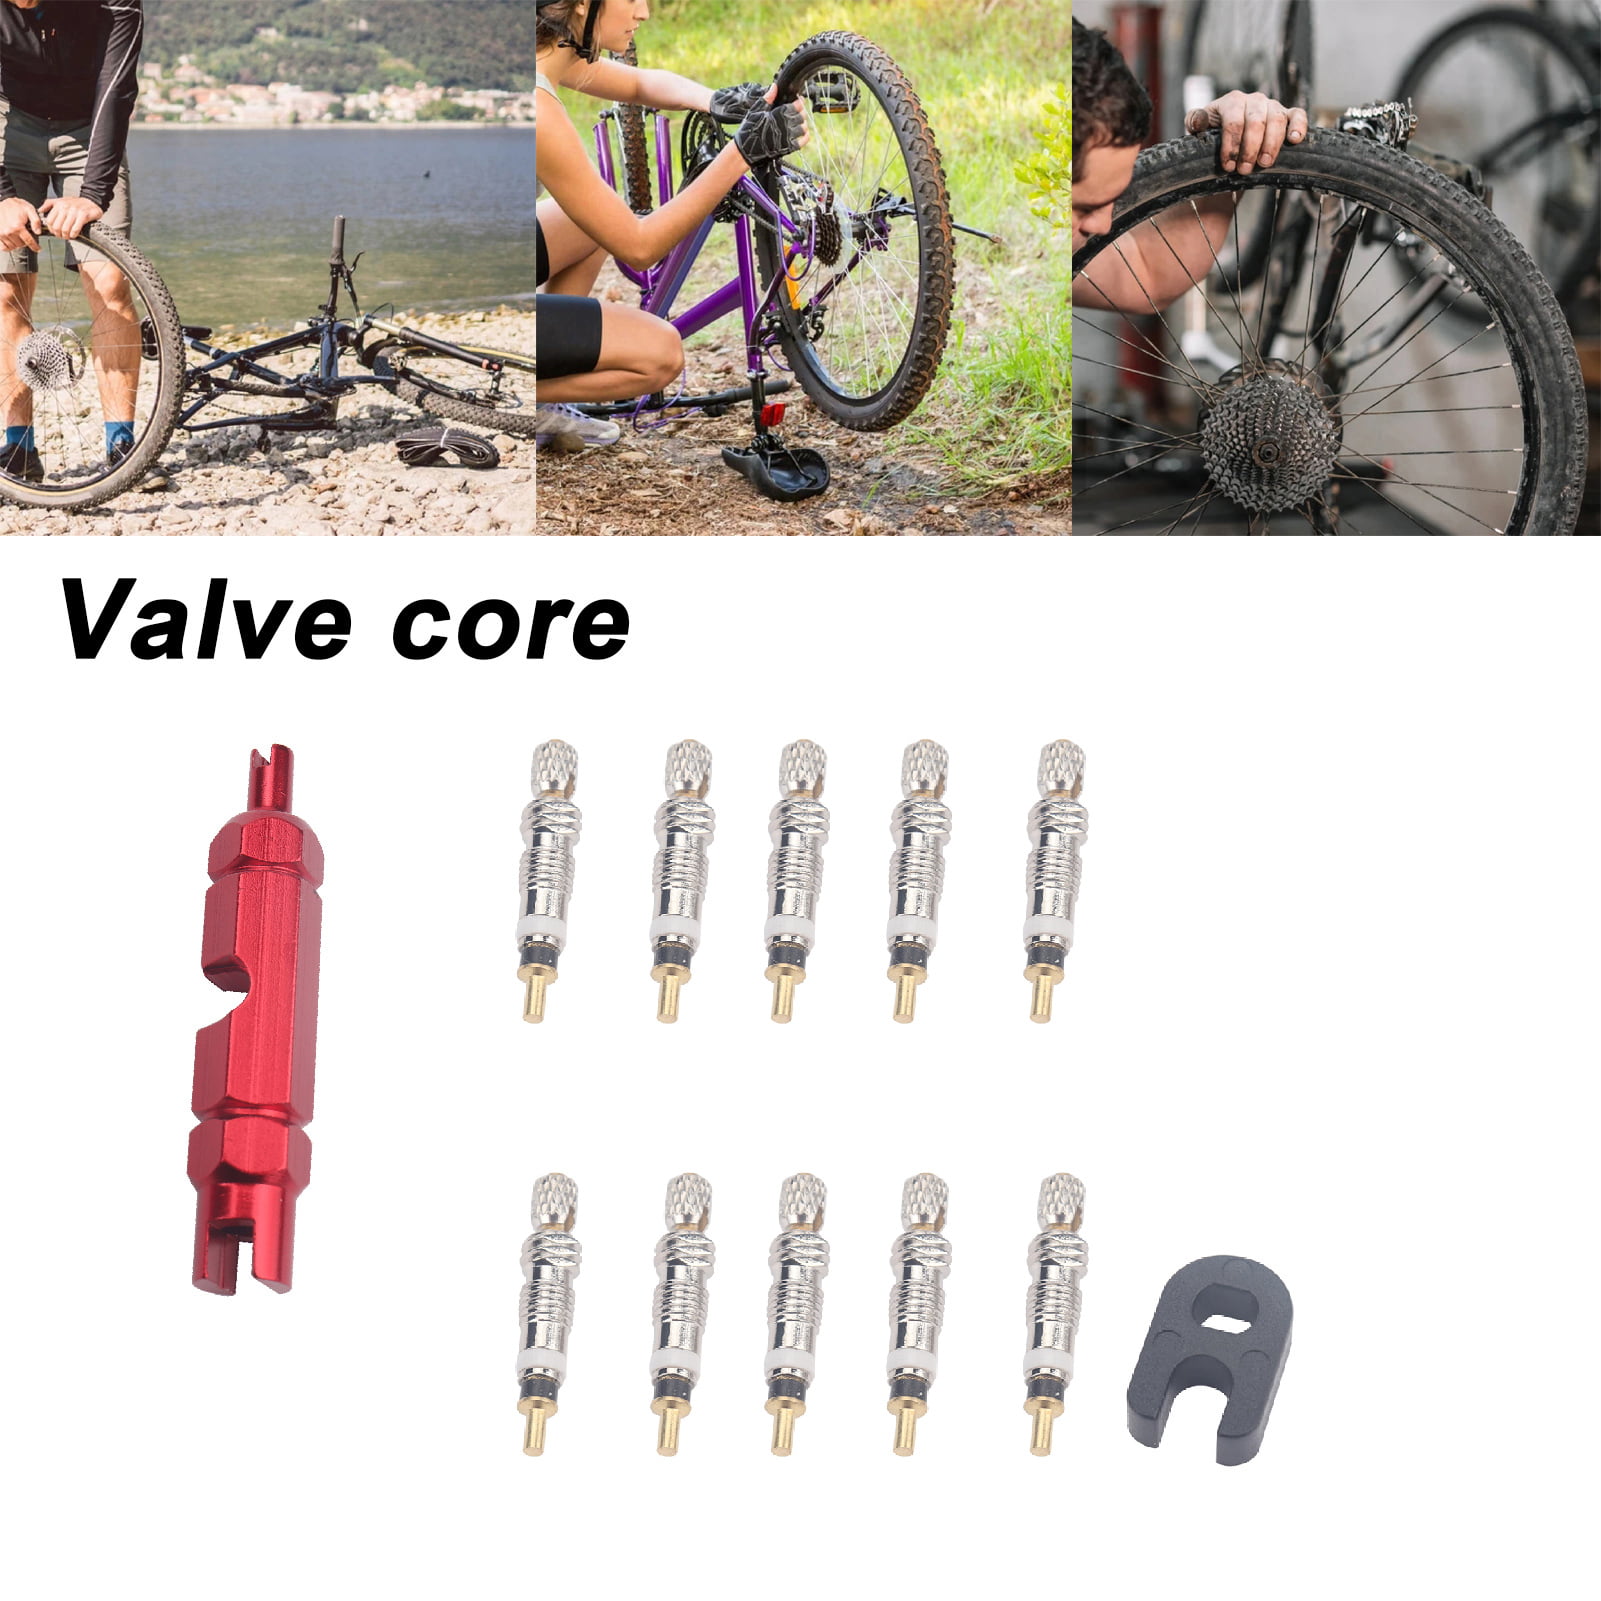 PRESTA VALVE CORES Replacement Bicycle Mountain Bike Mtb Road CX Cycles Tubeless 